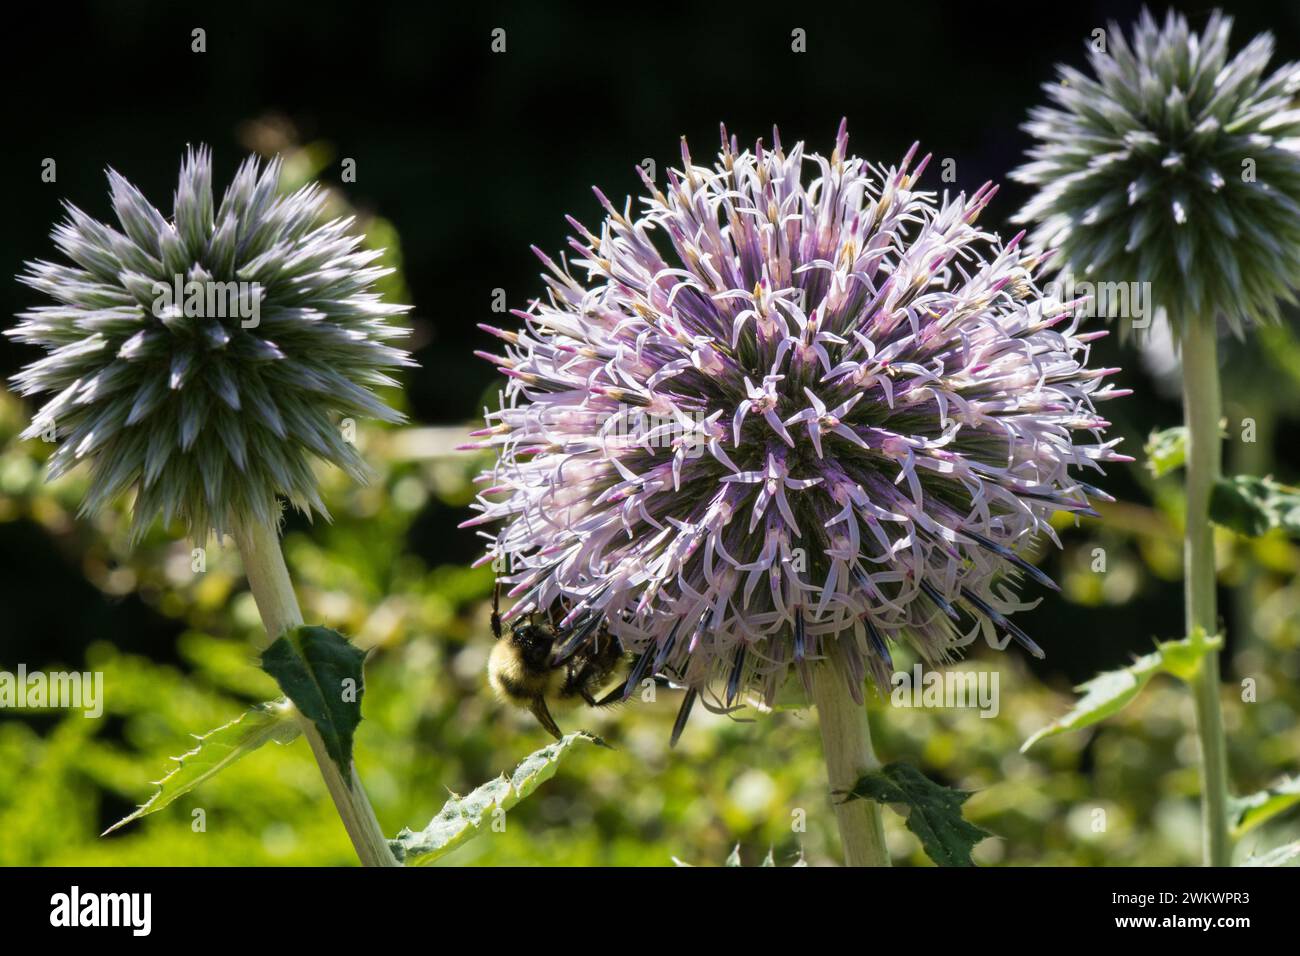 The attractive round flowerheads of Echinops commonly known as Globe Thistle Stock Photo